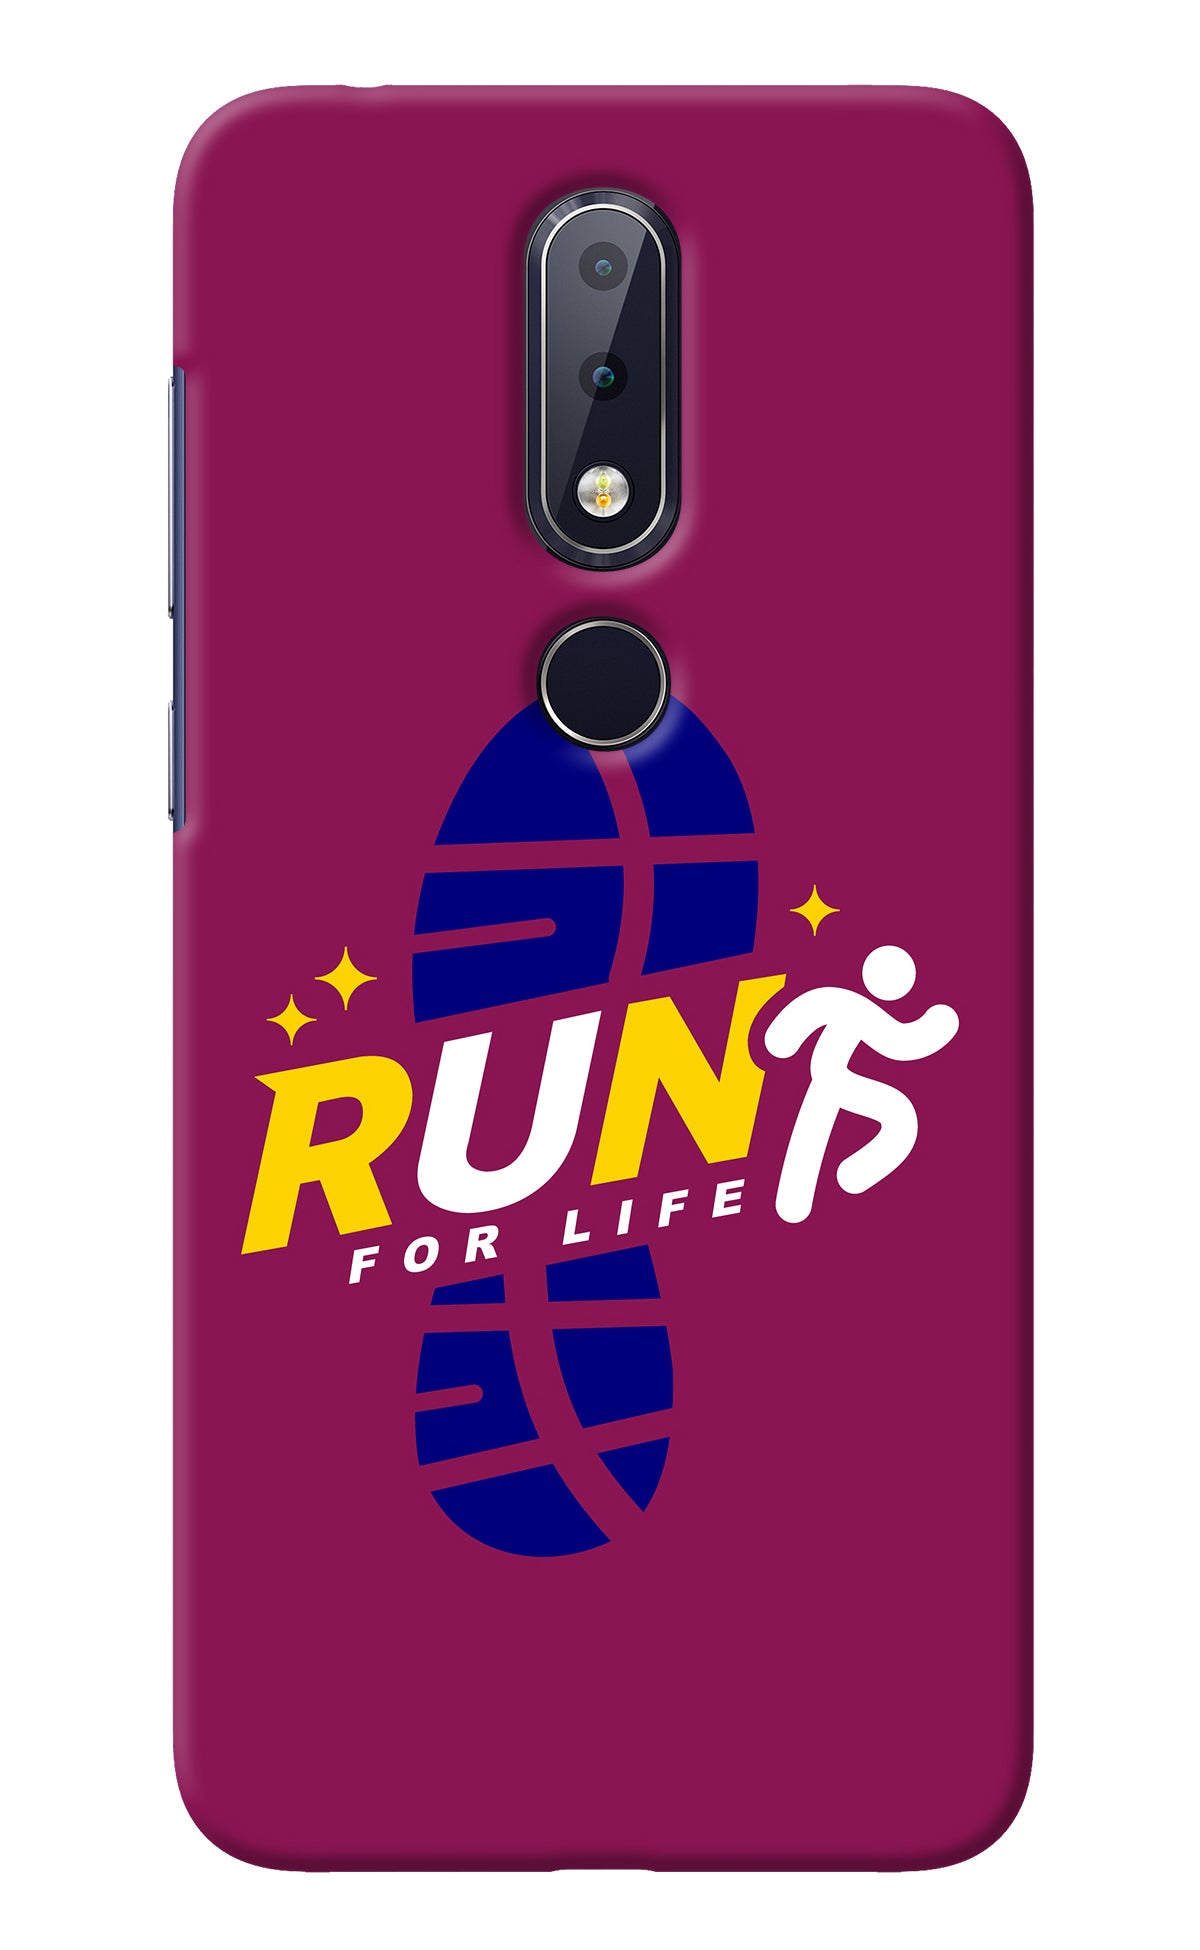 Run for Life Nokia 6.1 plus Back Cover